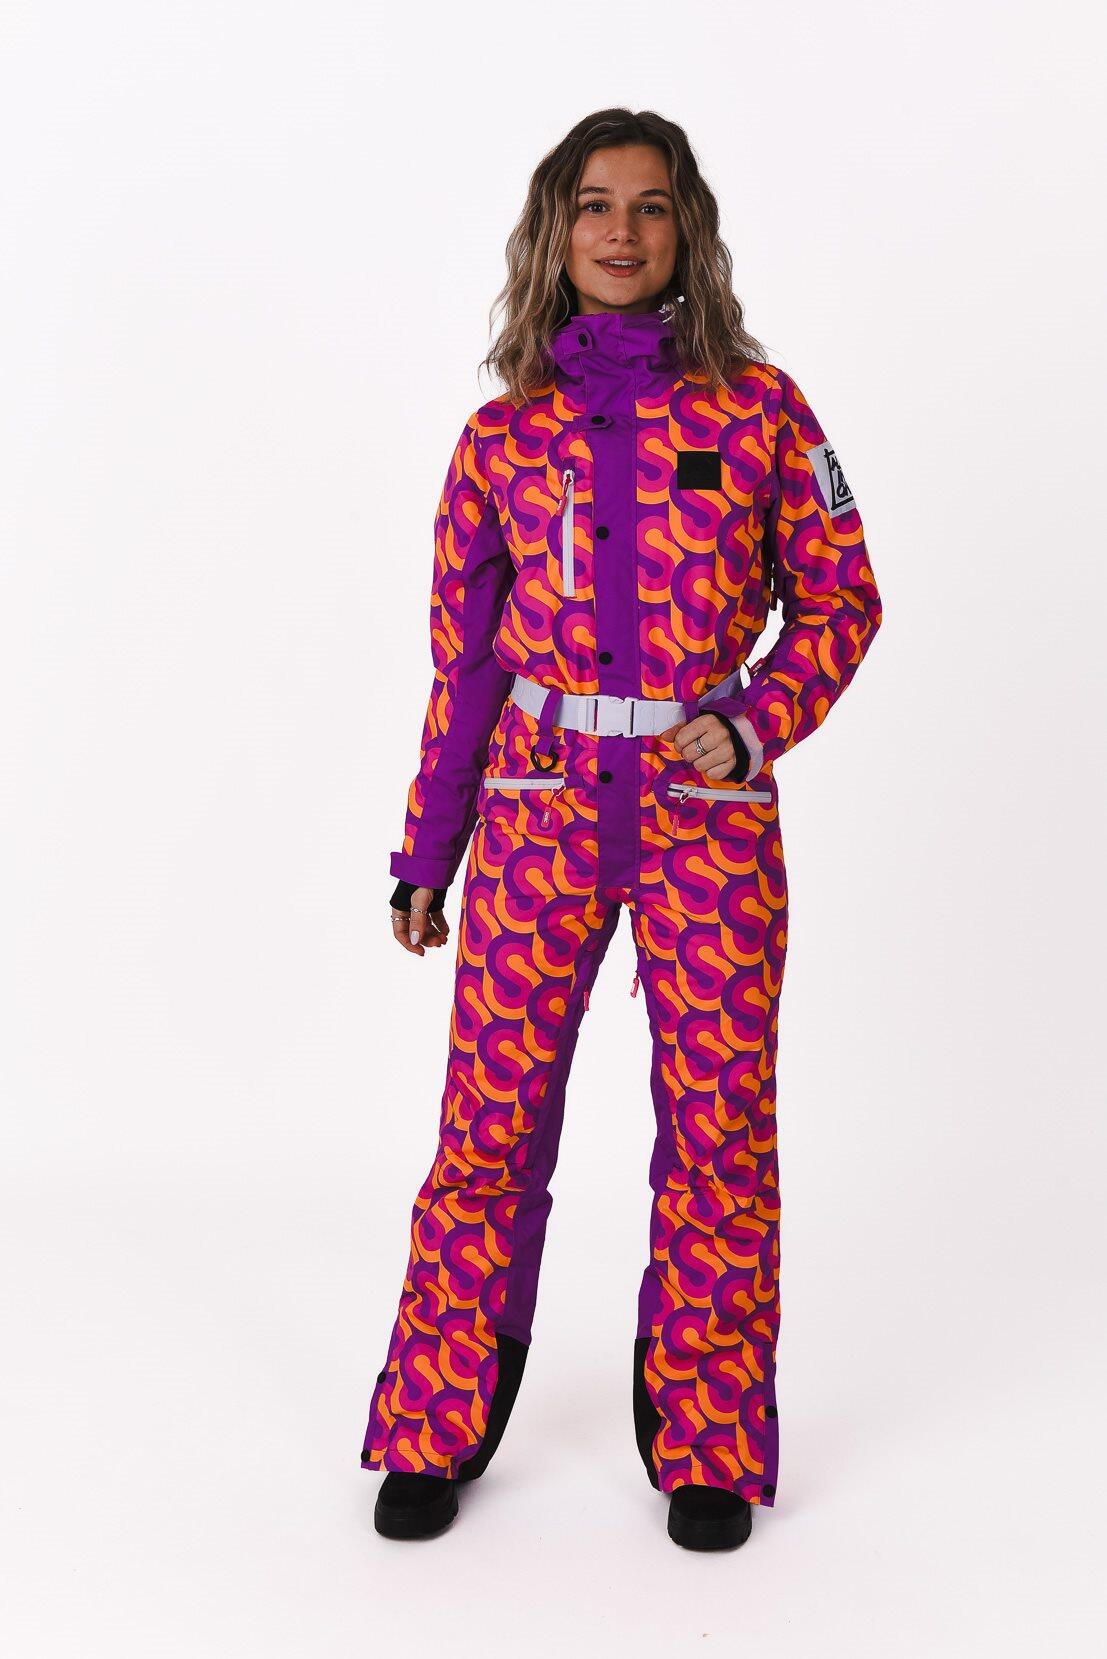 OOSC That 70's Show Female Ski Suit